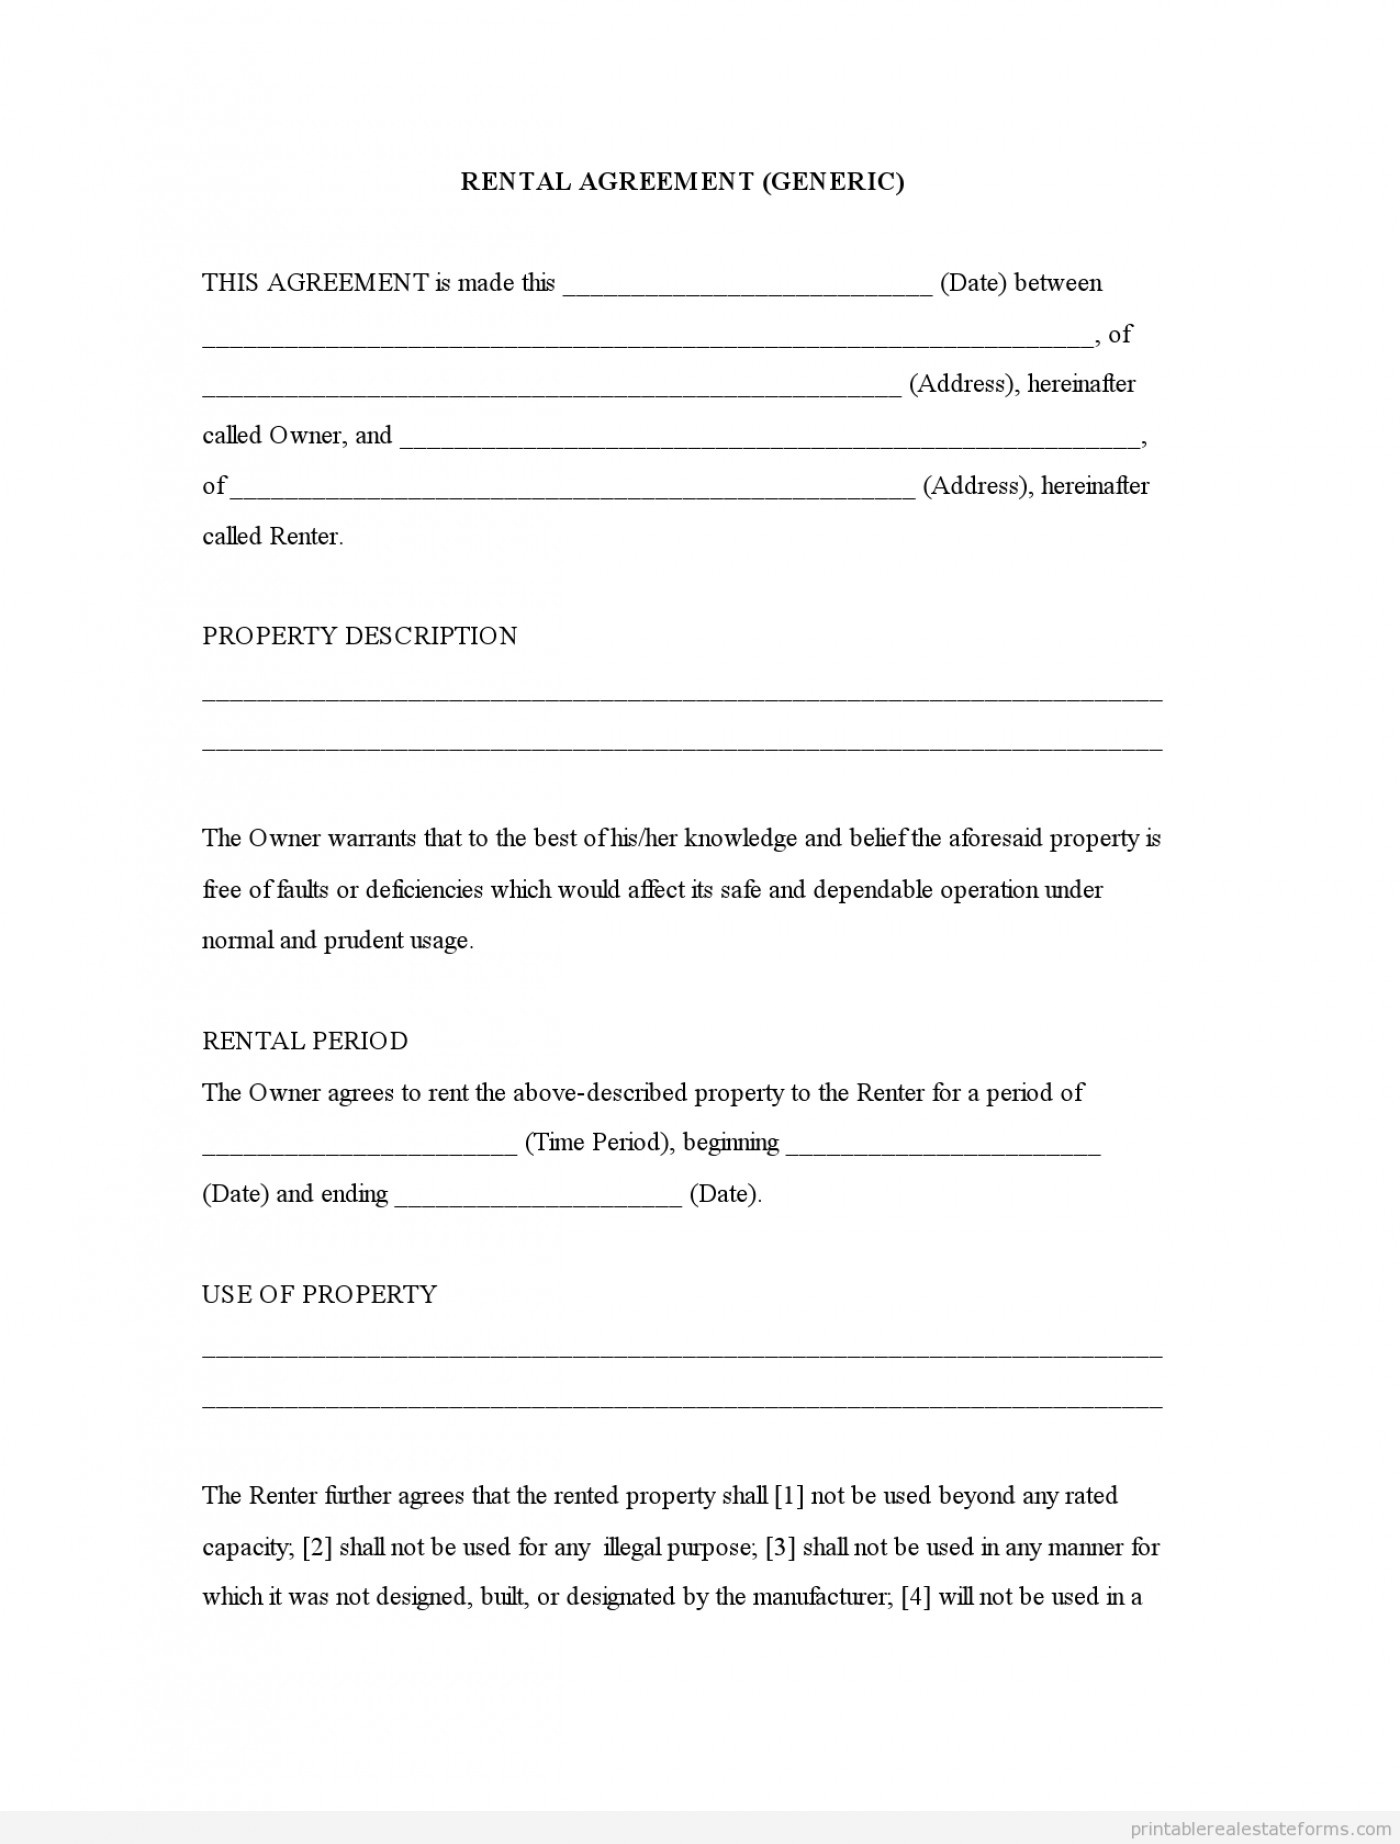 Free Rental Lease Agreement Templates Residential Commercial Free Printable Basic Rental